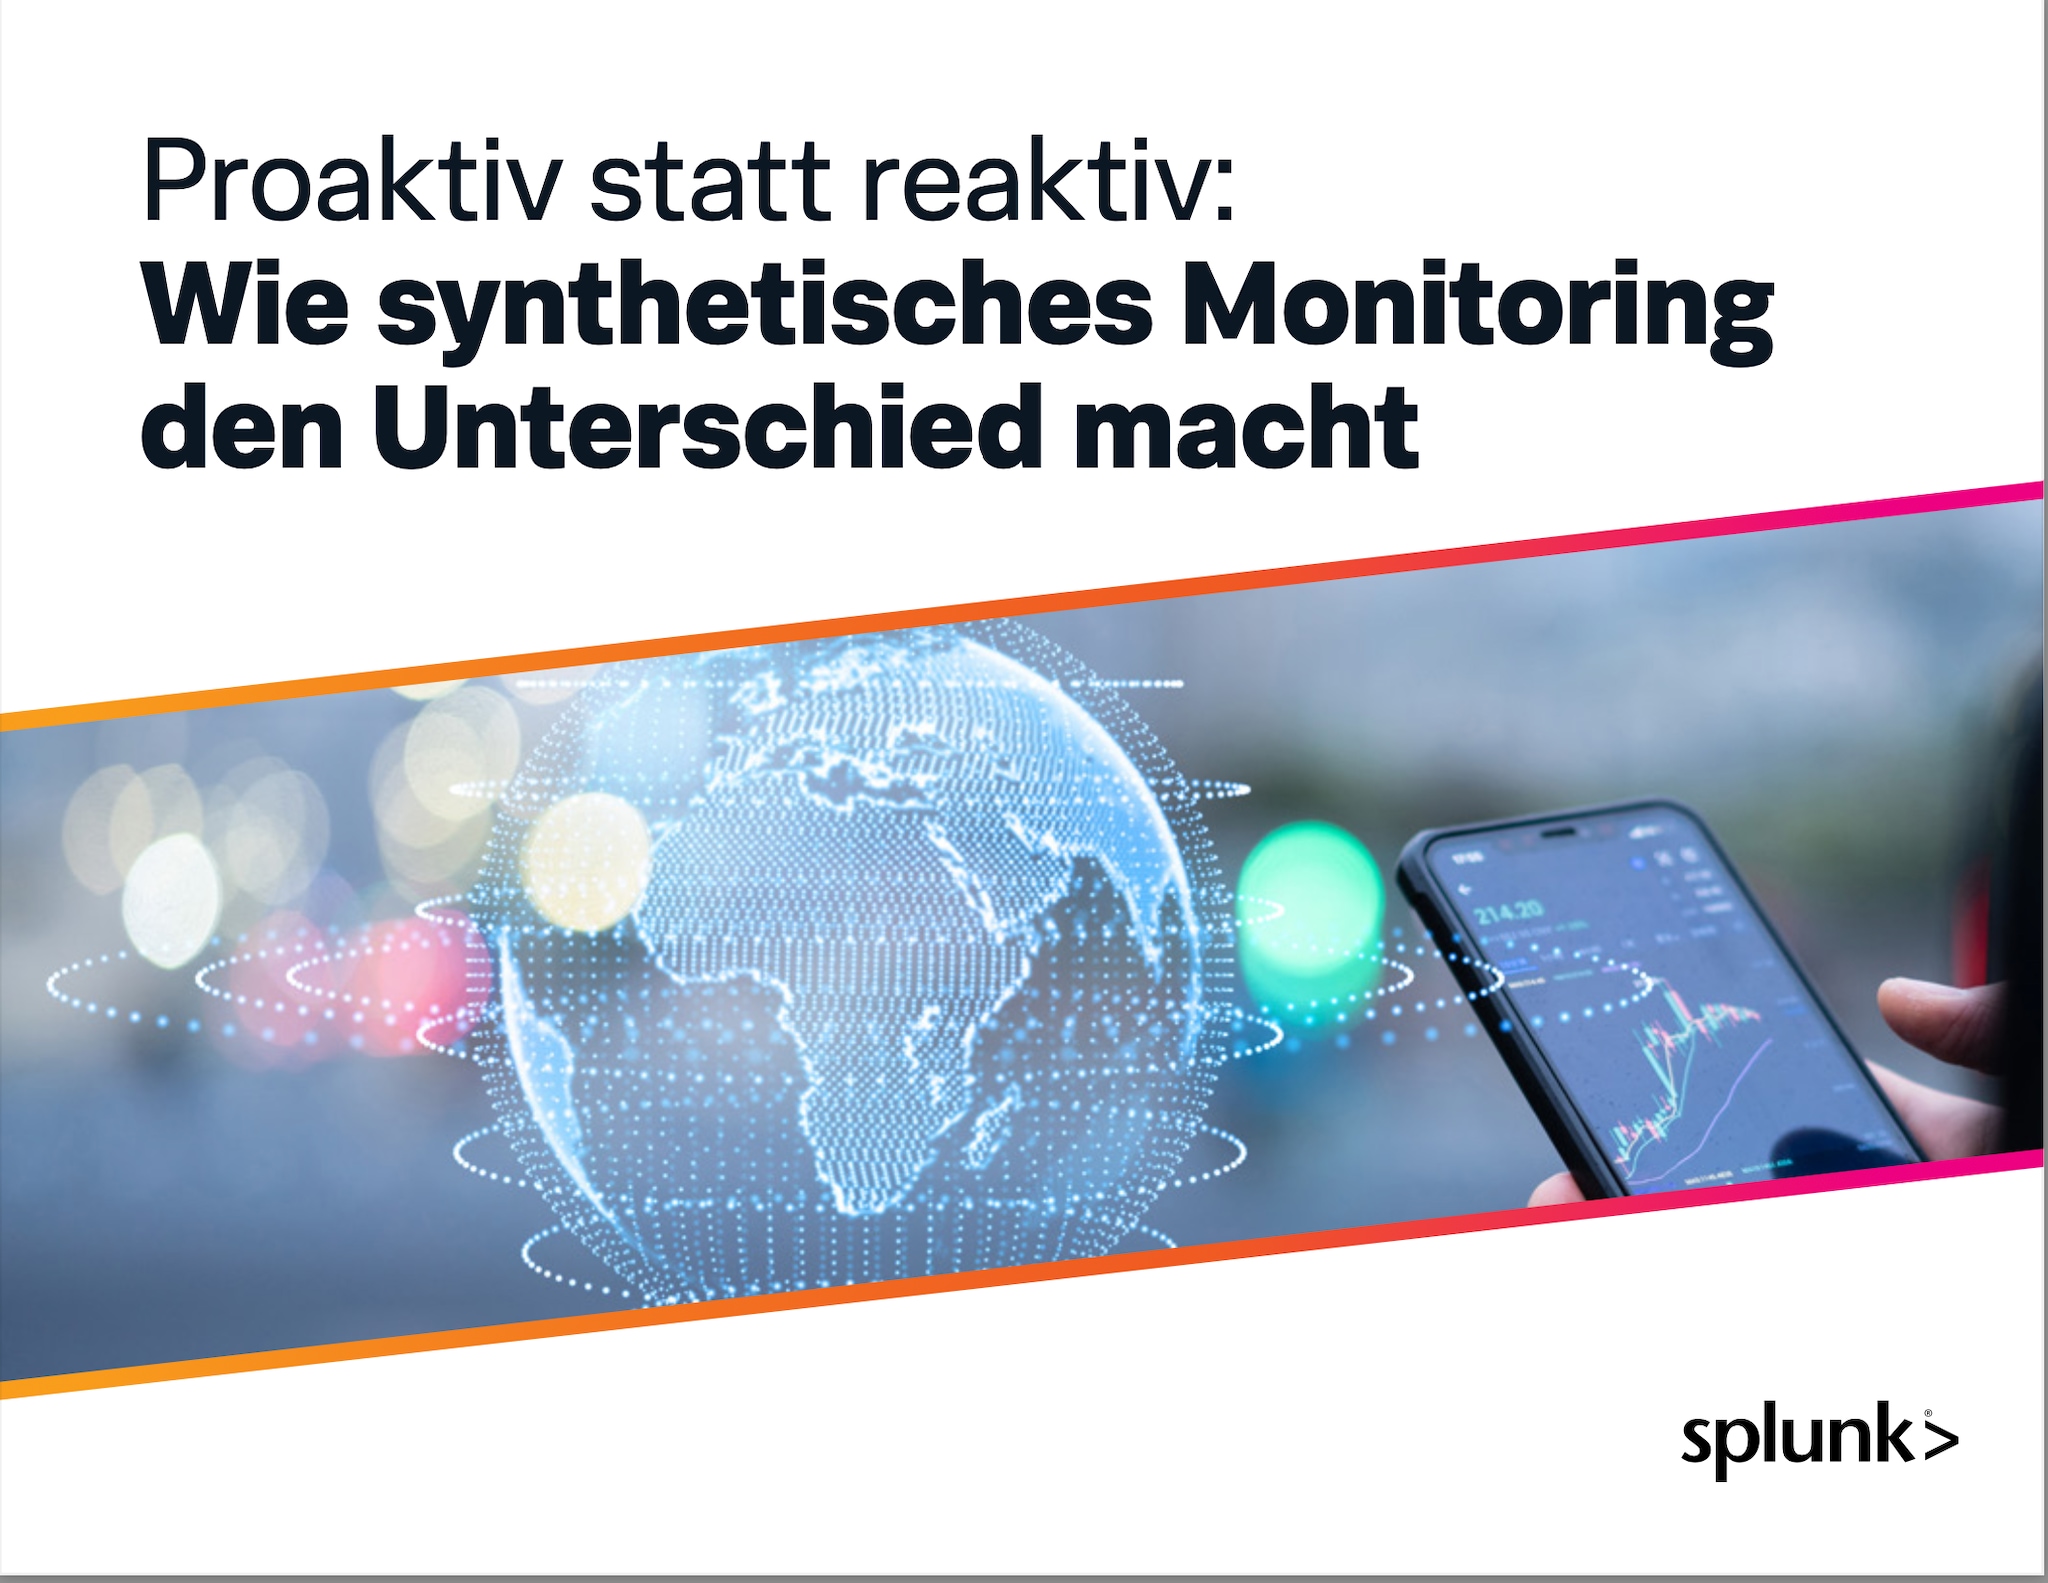 Synthetisches Monitoring